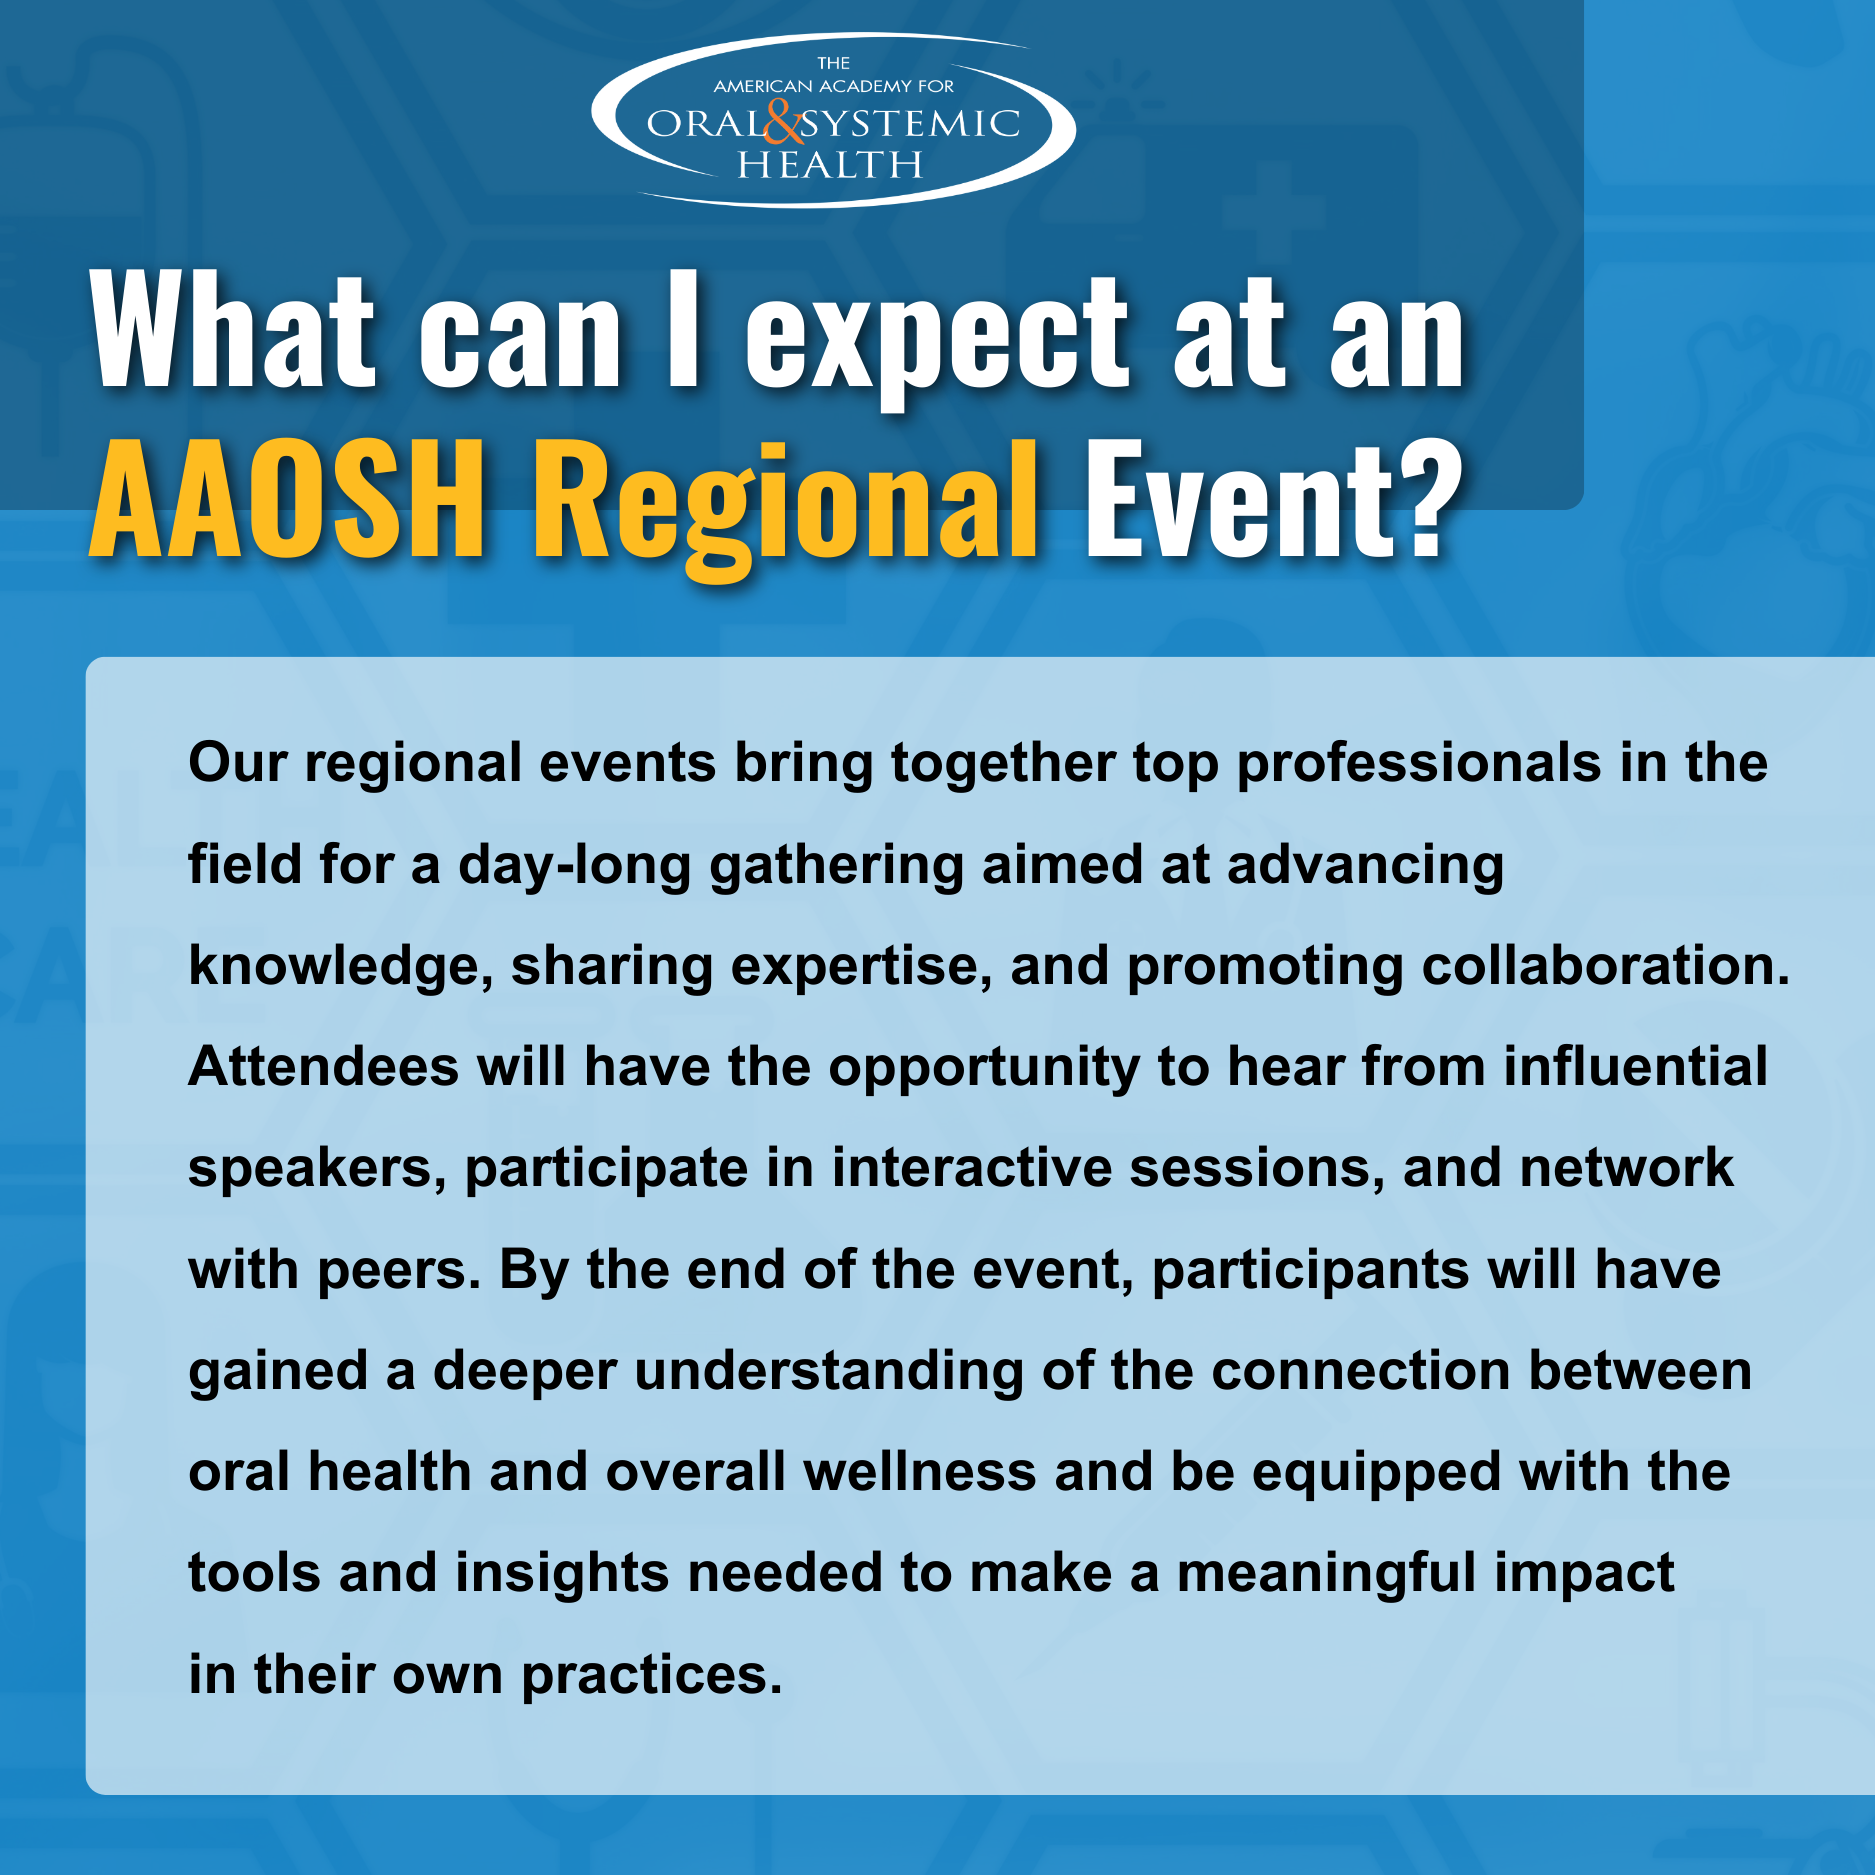 What can I expect at an AAOSH Regional Event? Our regional events bring together top professionals in the field for a day-long gathering aimed at advancing knowledge, sharing expertise, and promoting collaboration. Attendees will have the opportunity to hear from influential speakers, participate in interactive sessions, and network with peers. By the end of the event, participants will have gained a deeper understanding of the connection between oral health and overall wellness, and be equipped with the tools and insights needed to make a meaningful impact in their own practices.